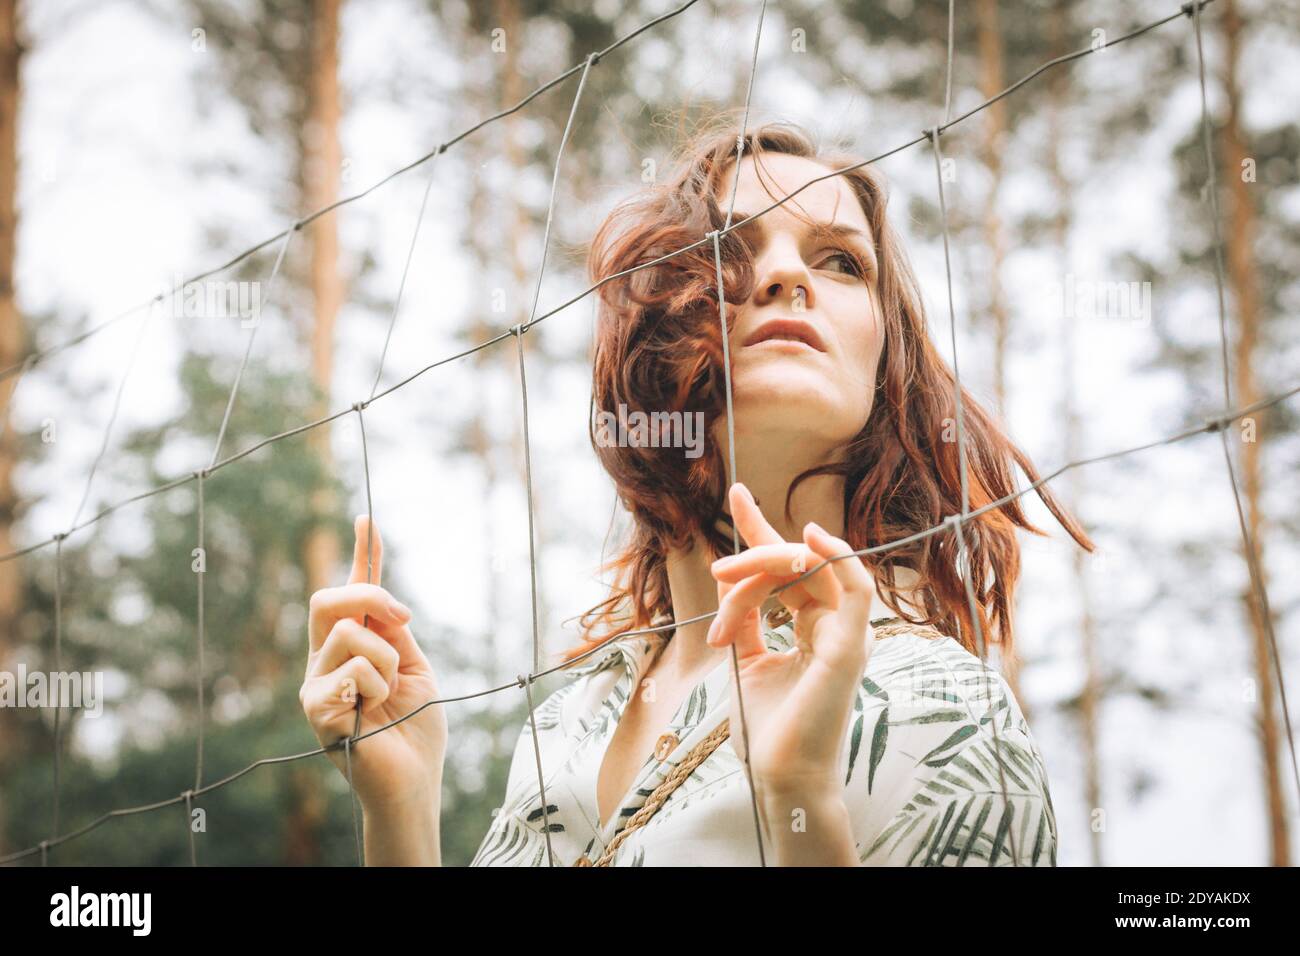 Redhead girl behind a fence outdoors. Psychology, phobias or fears Stock Photo